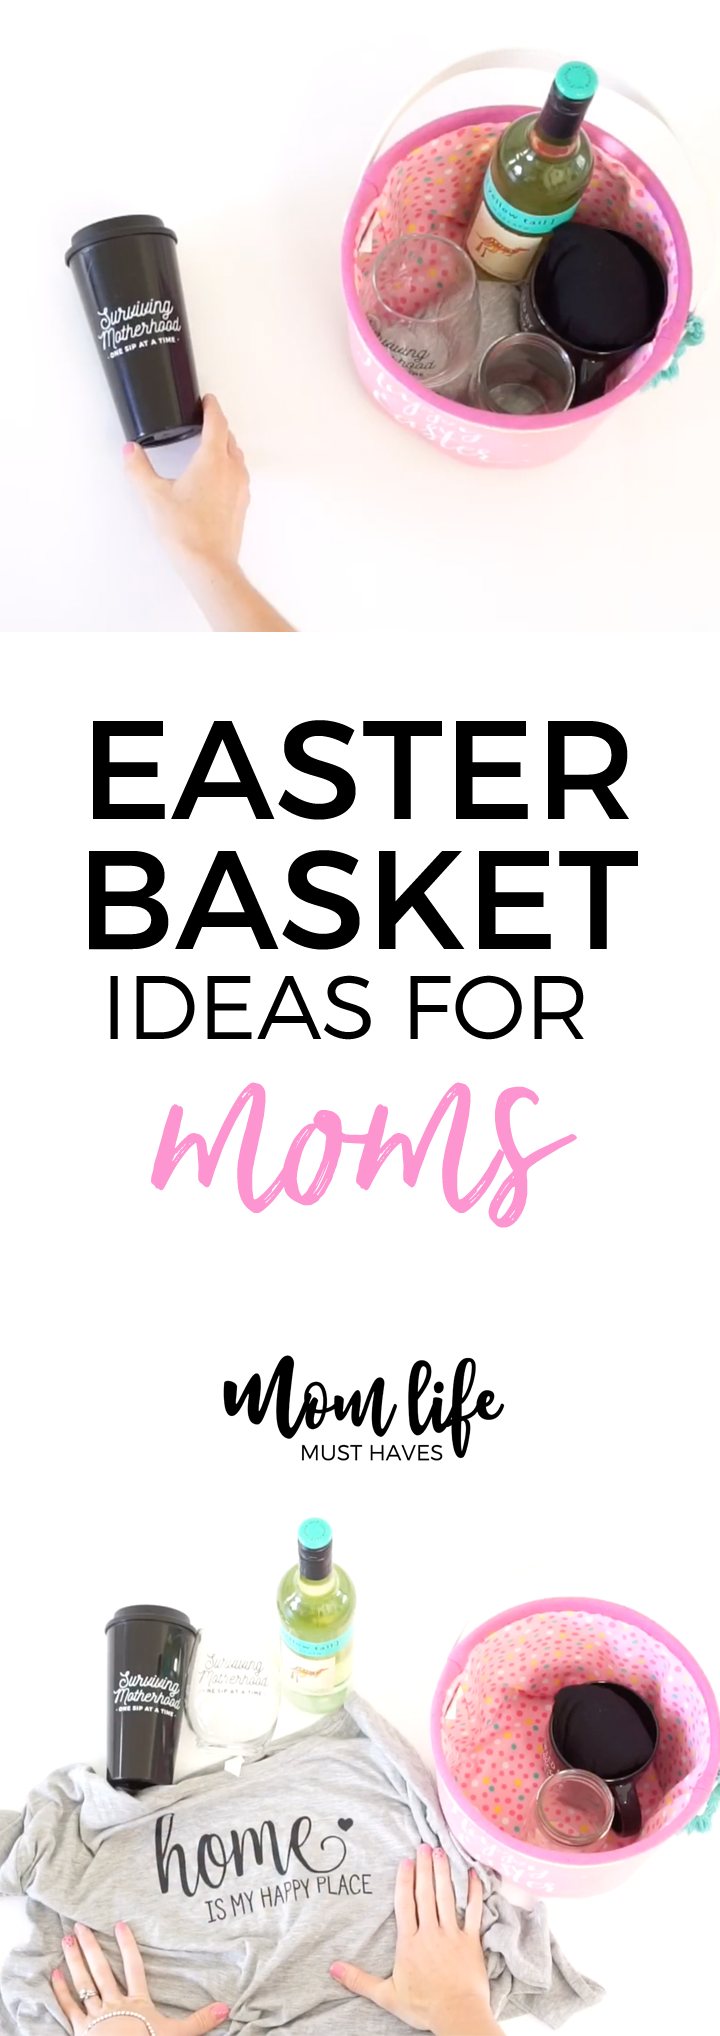 Fun and simple Easter basket ideas for moms from Mom Life Must Haves!